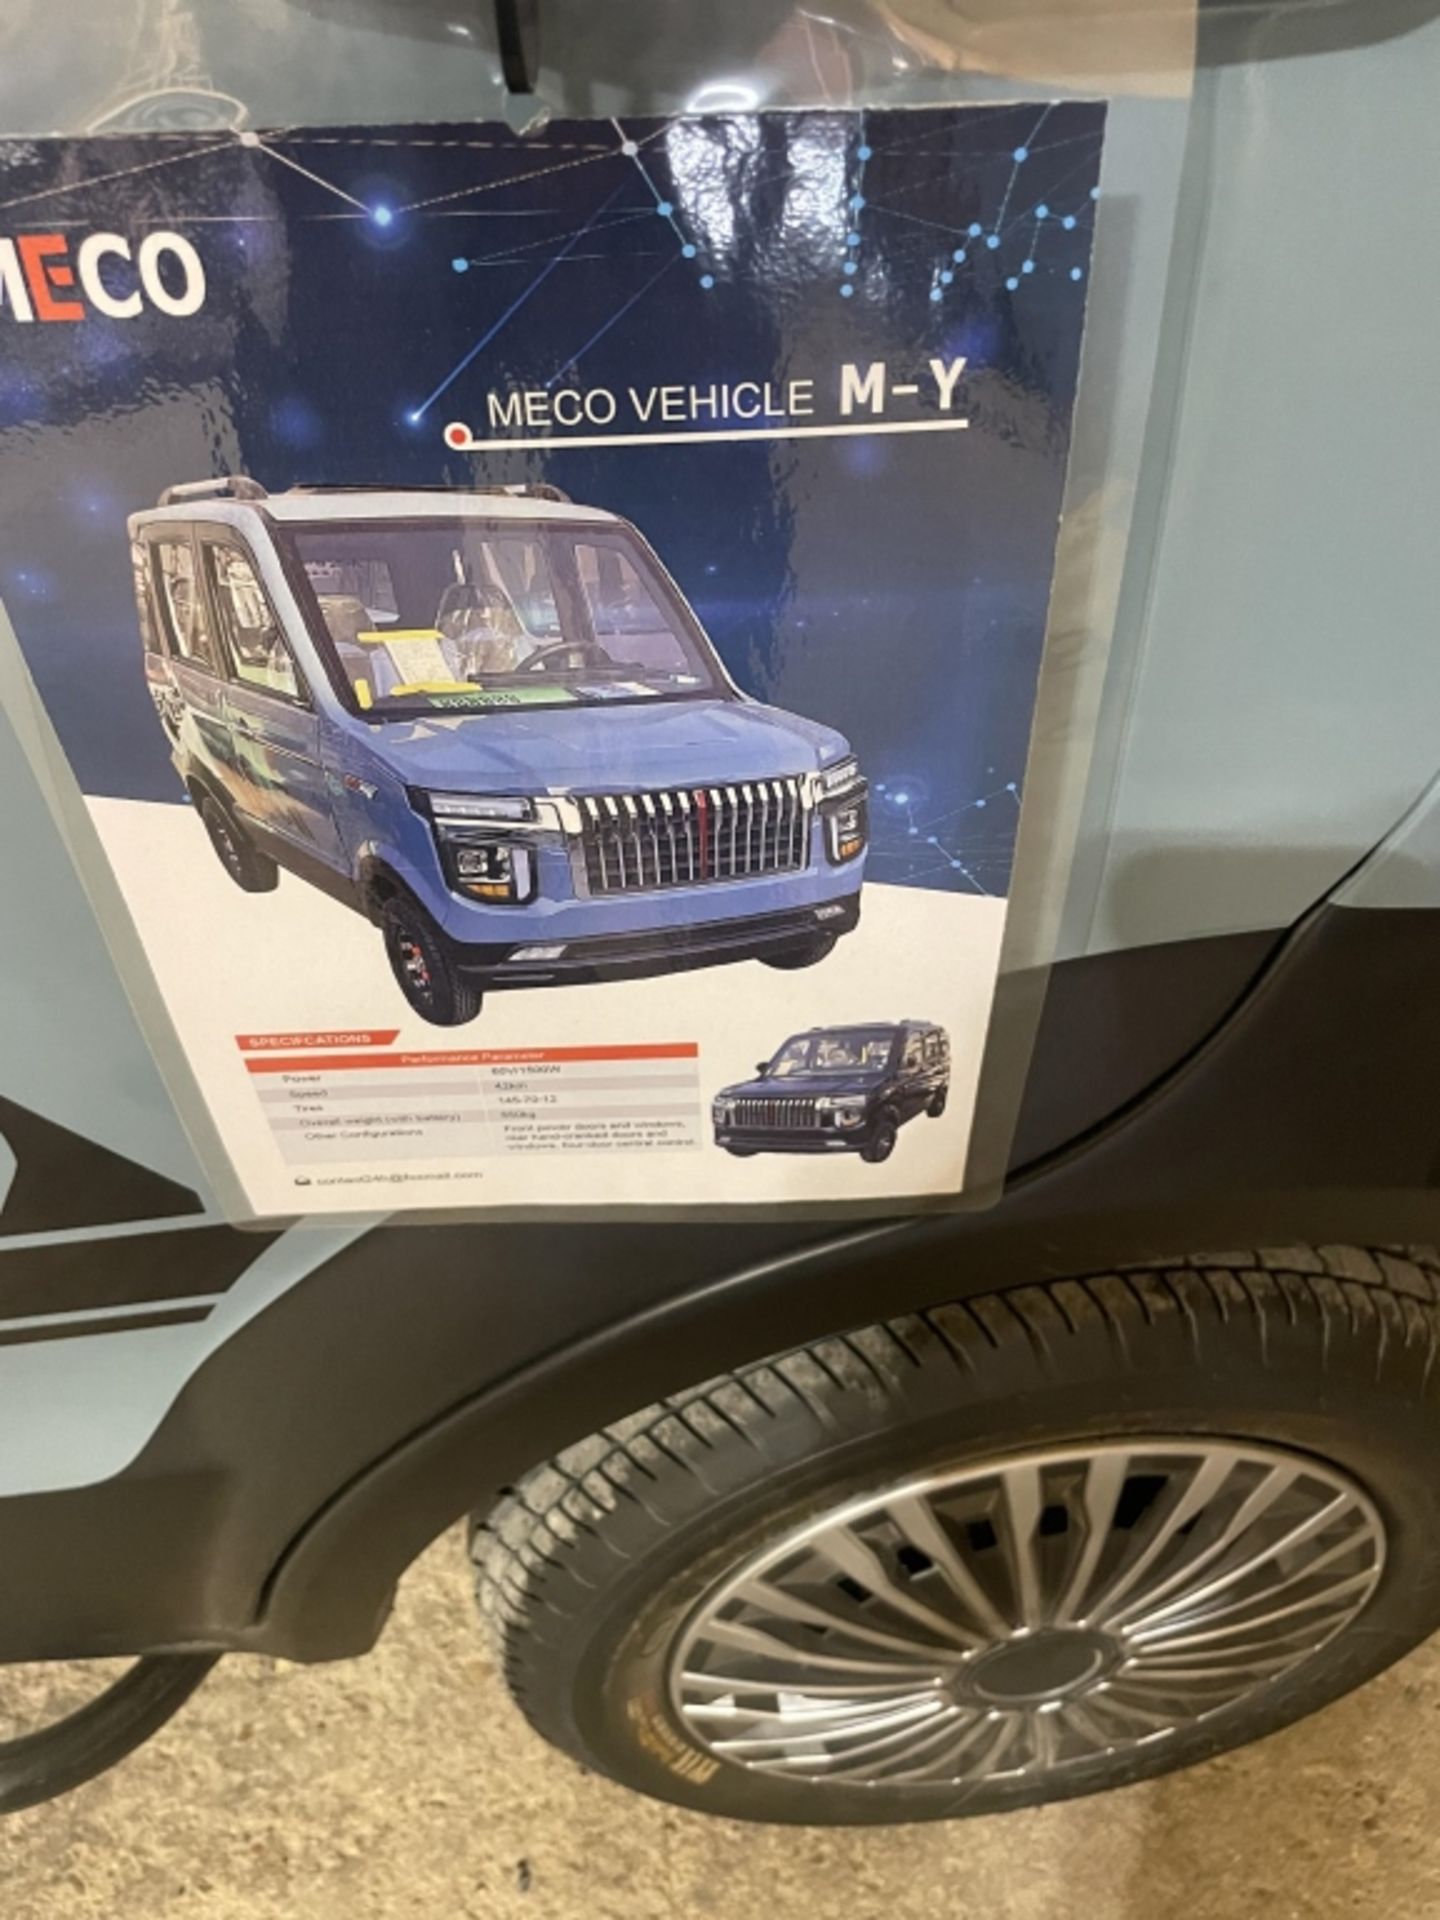 MECO M-Y Electric Vehicle - Image 23 of 25